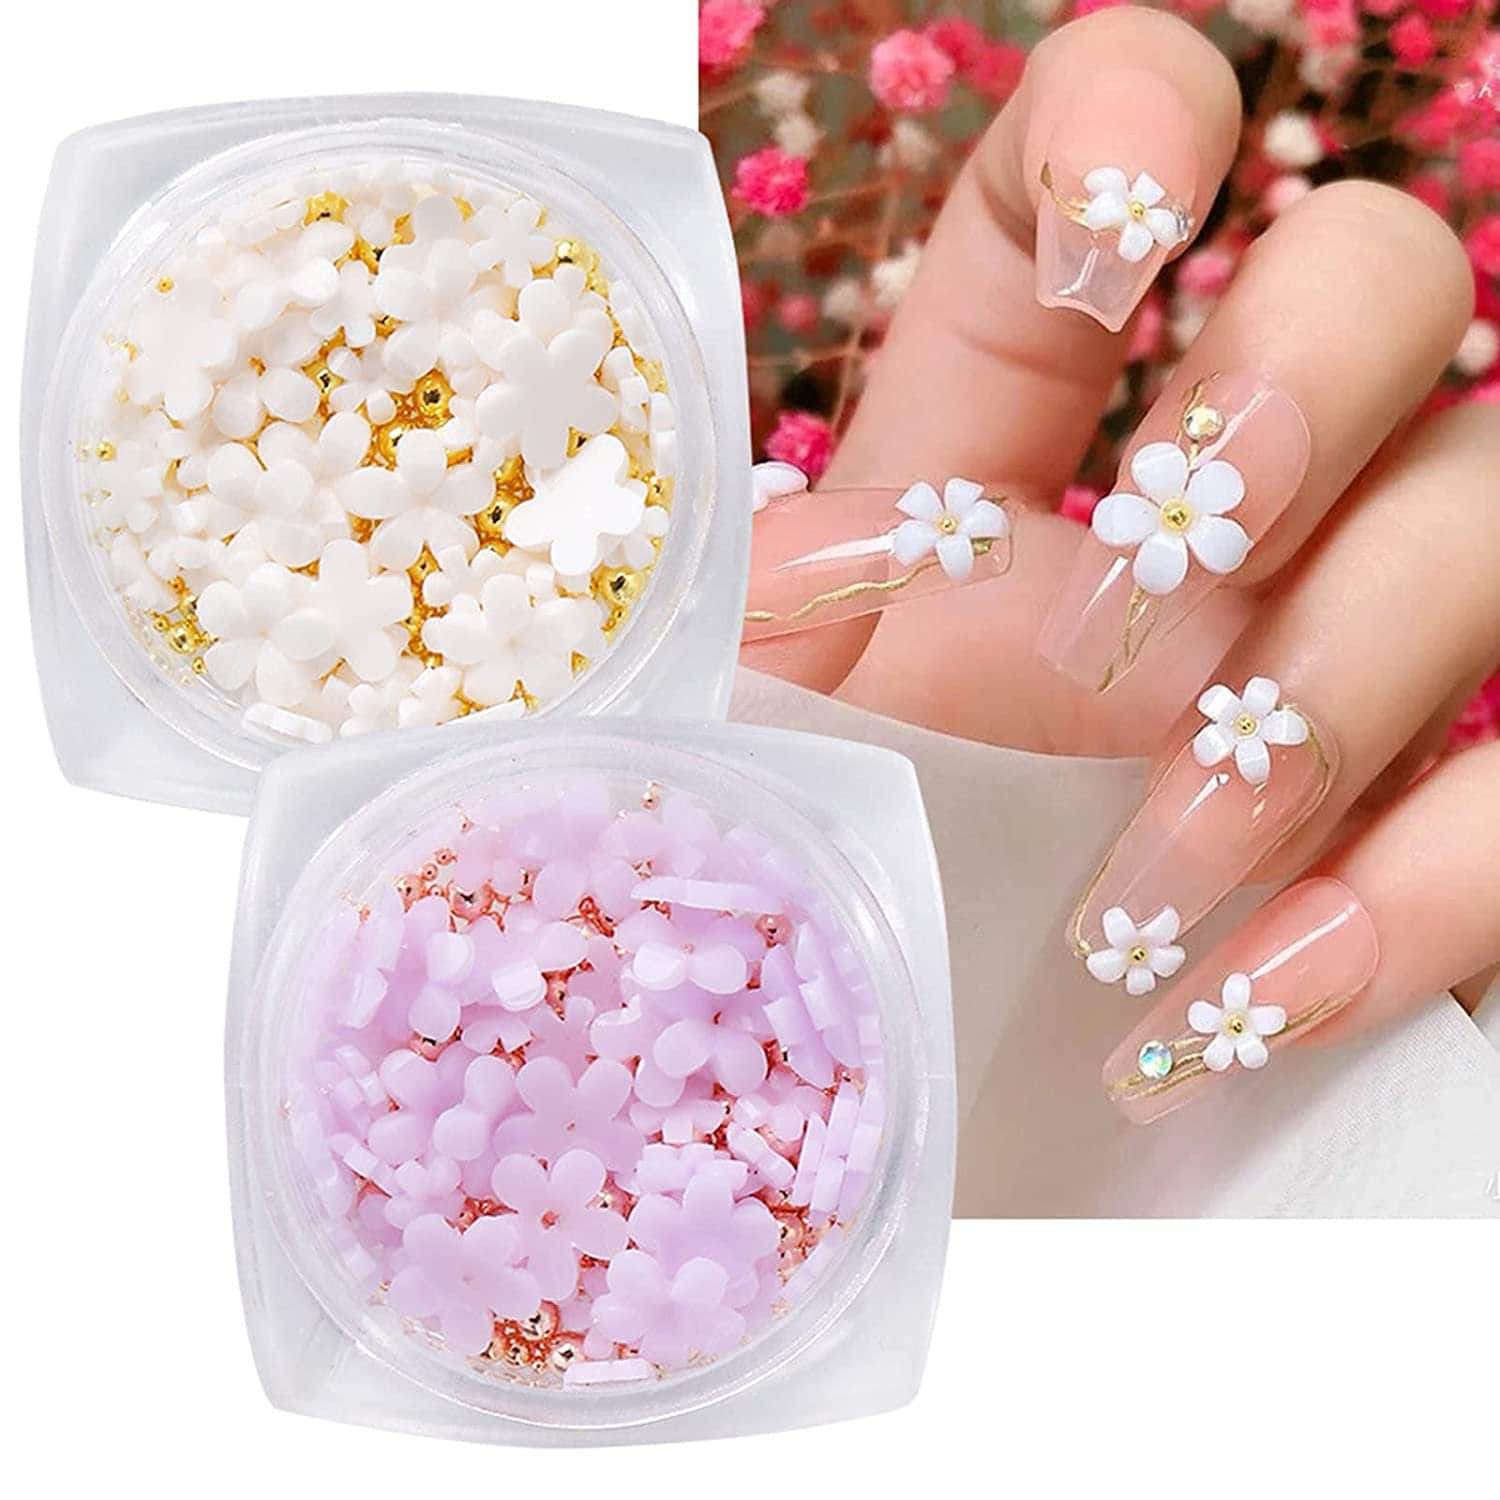 maycreate 3D Flower Nail Charms, Nail Art Resin Flower Decals for